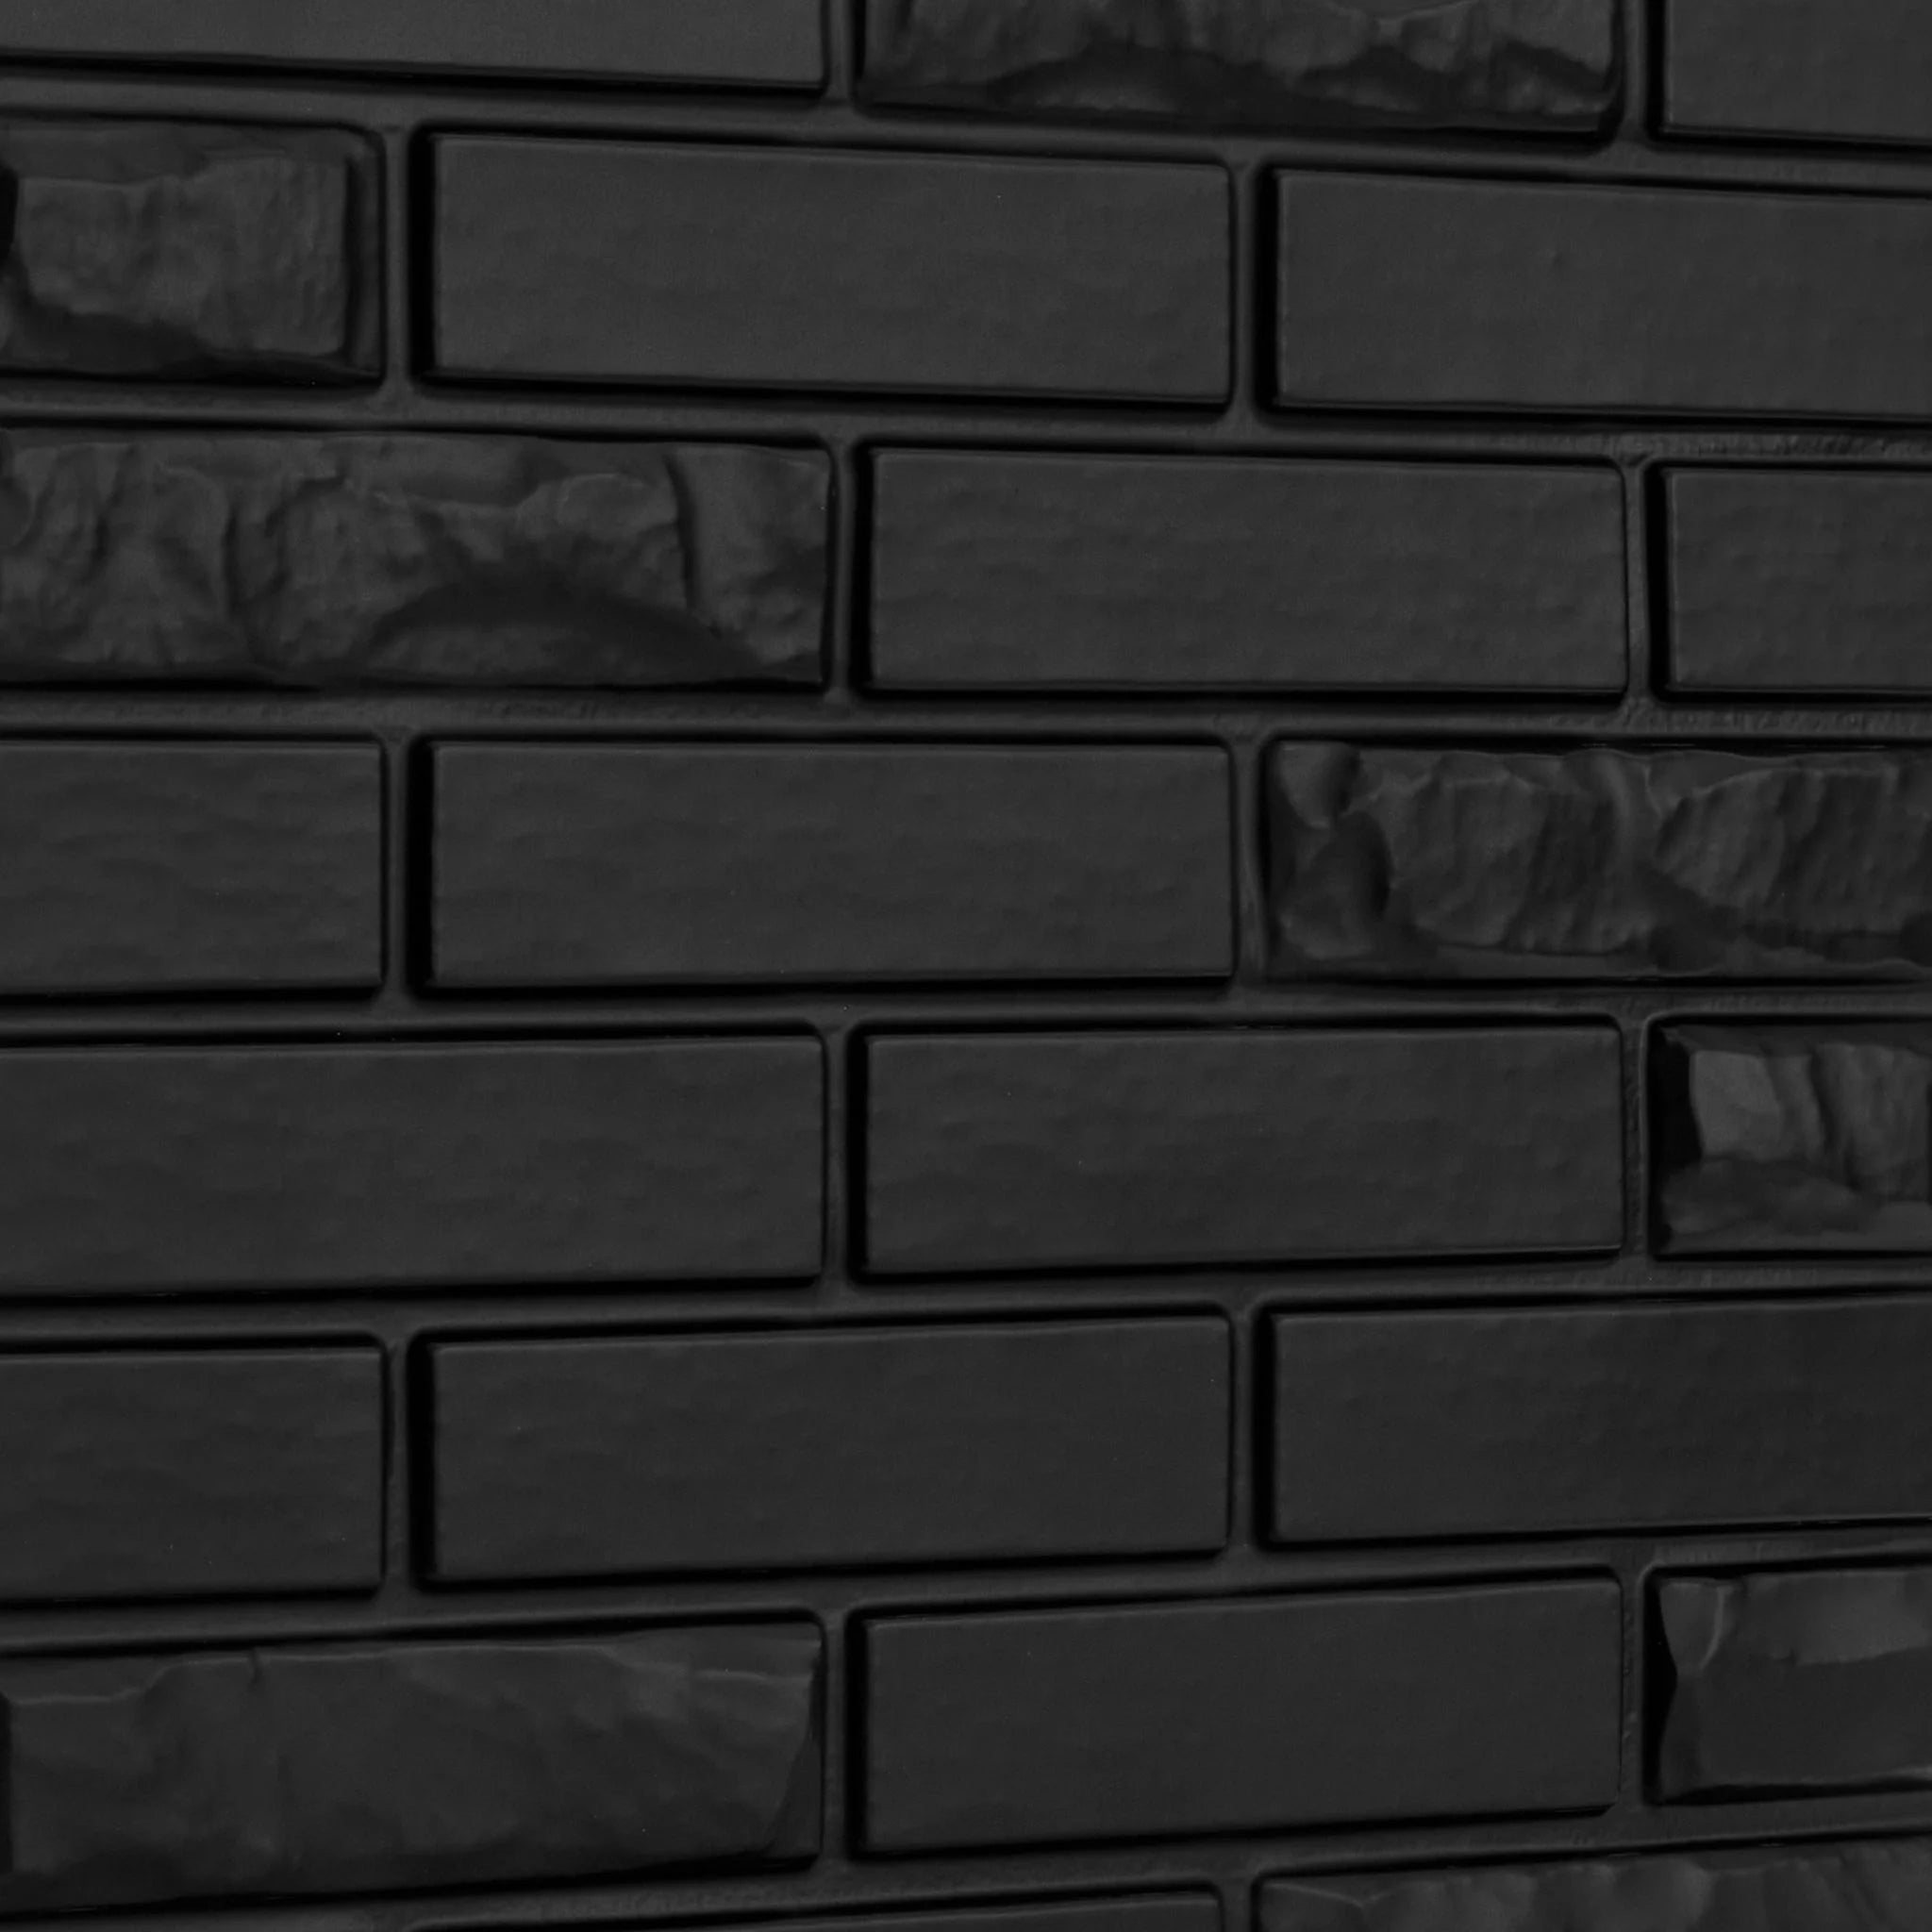 Close-up of black PVC wall panel with brick designs